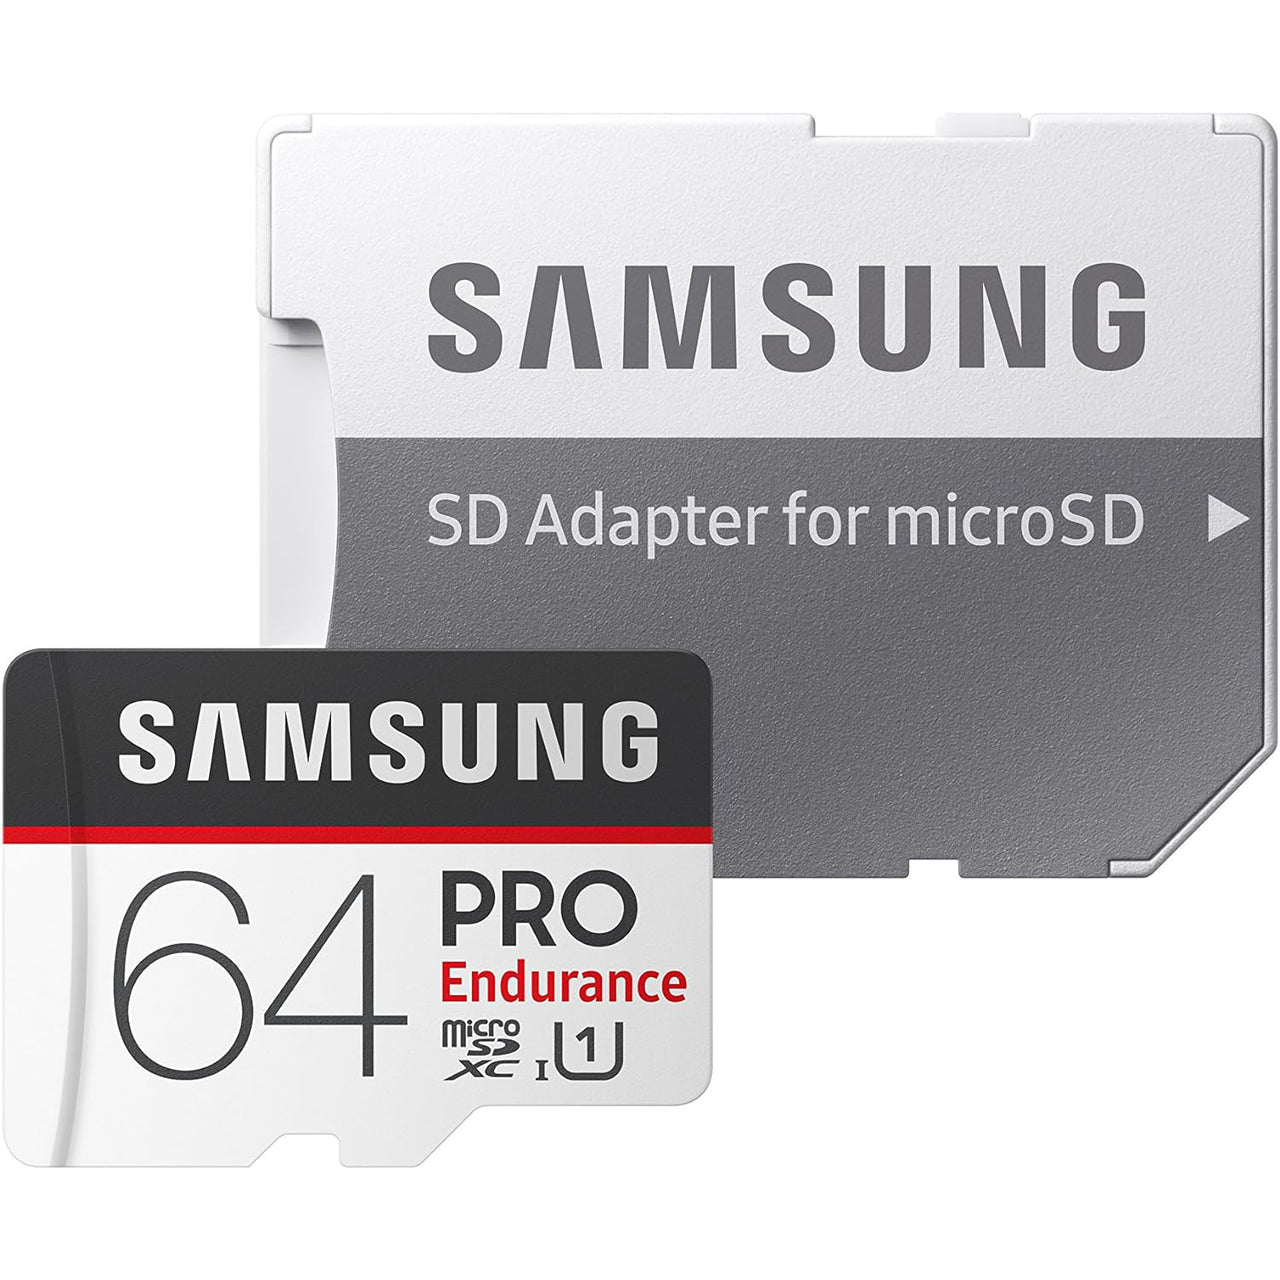 Samsung PRO Endurance microSD Card with Adapter - 64GB |4K|Class 10|UHS-I| 100 MB/s